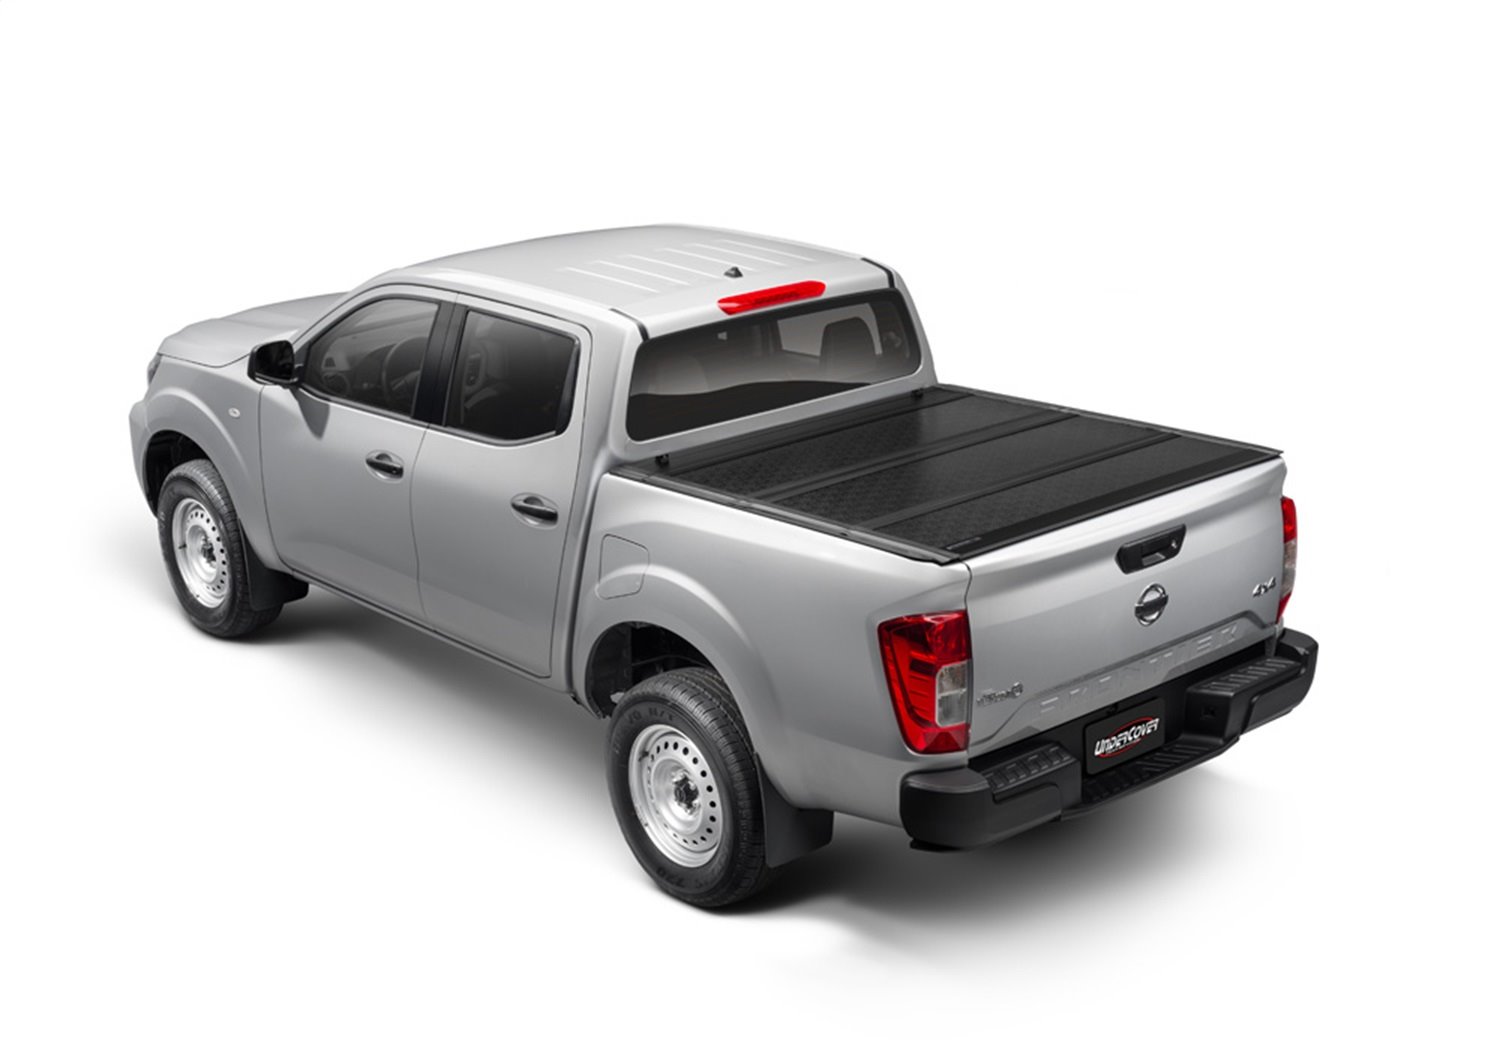 FX51021 Flex Hard Folding Cover, Fits Select Nissan Frontier 6'1" Bed w/ or w/o Utilty Track System, Black Textured